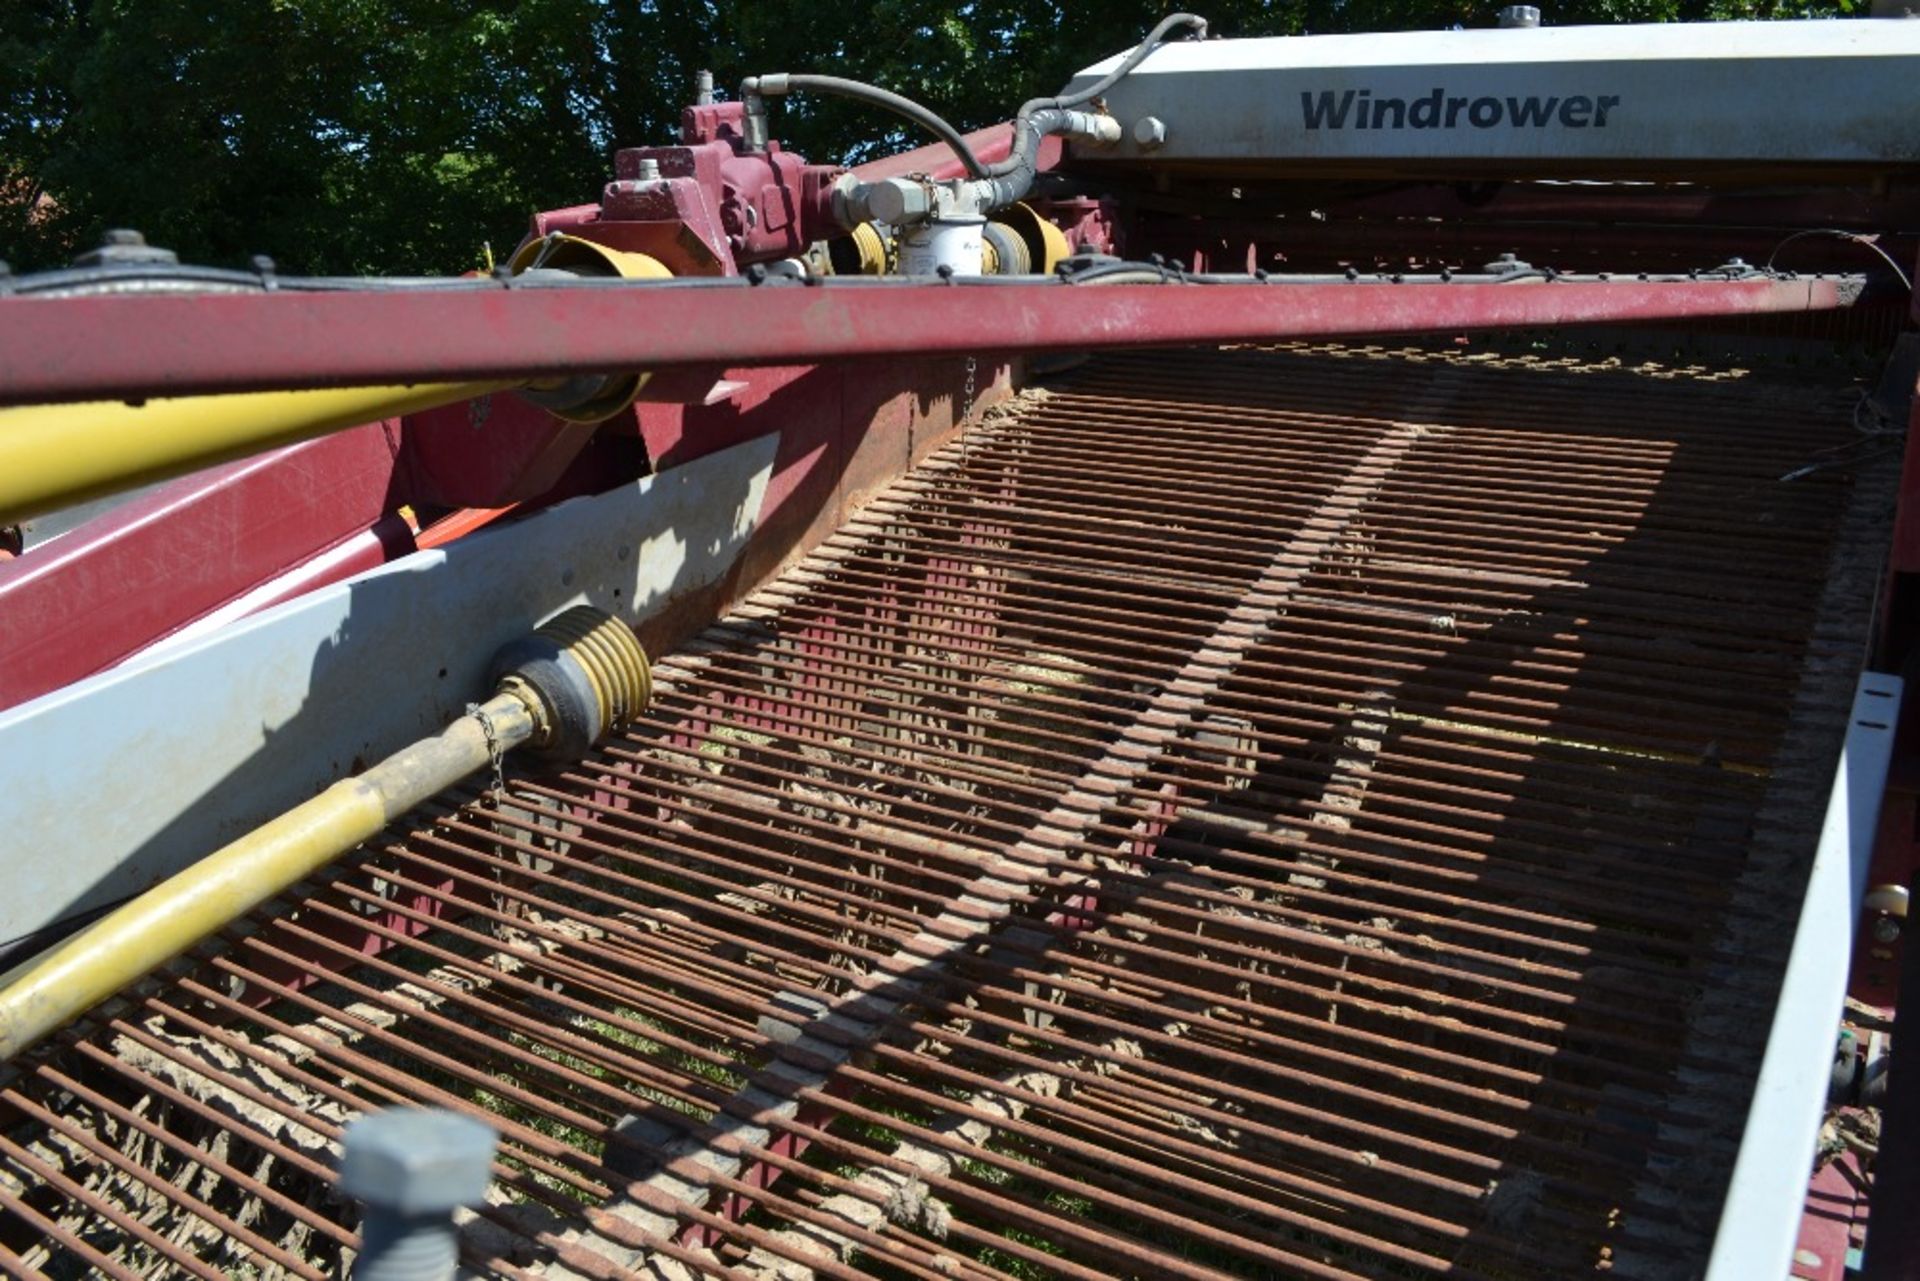 Scanstone trailed Windrower. Model WD17-2+5. 2014. Serial number 2030. Set for 72" beds. LM - Image 27 of 29